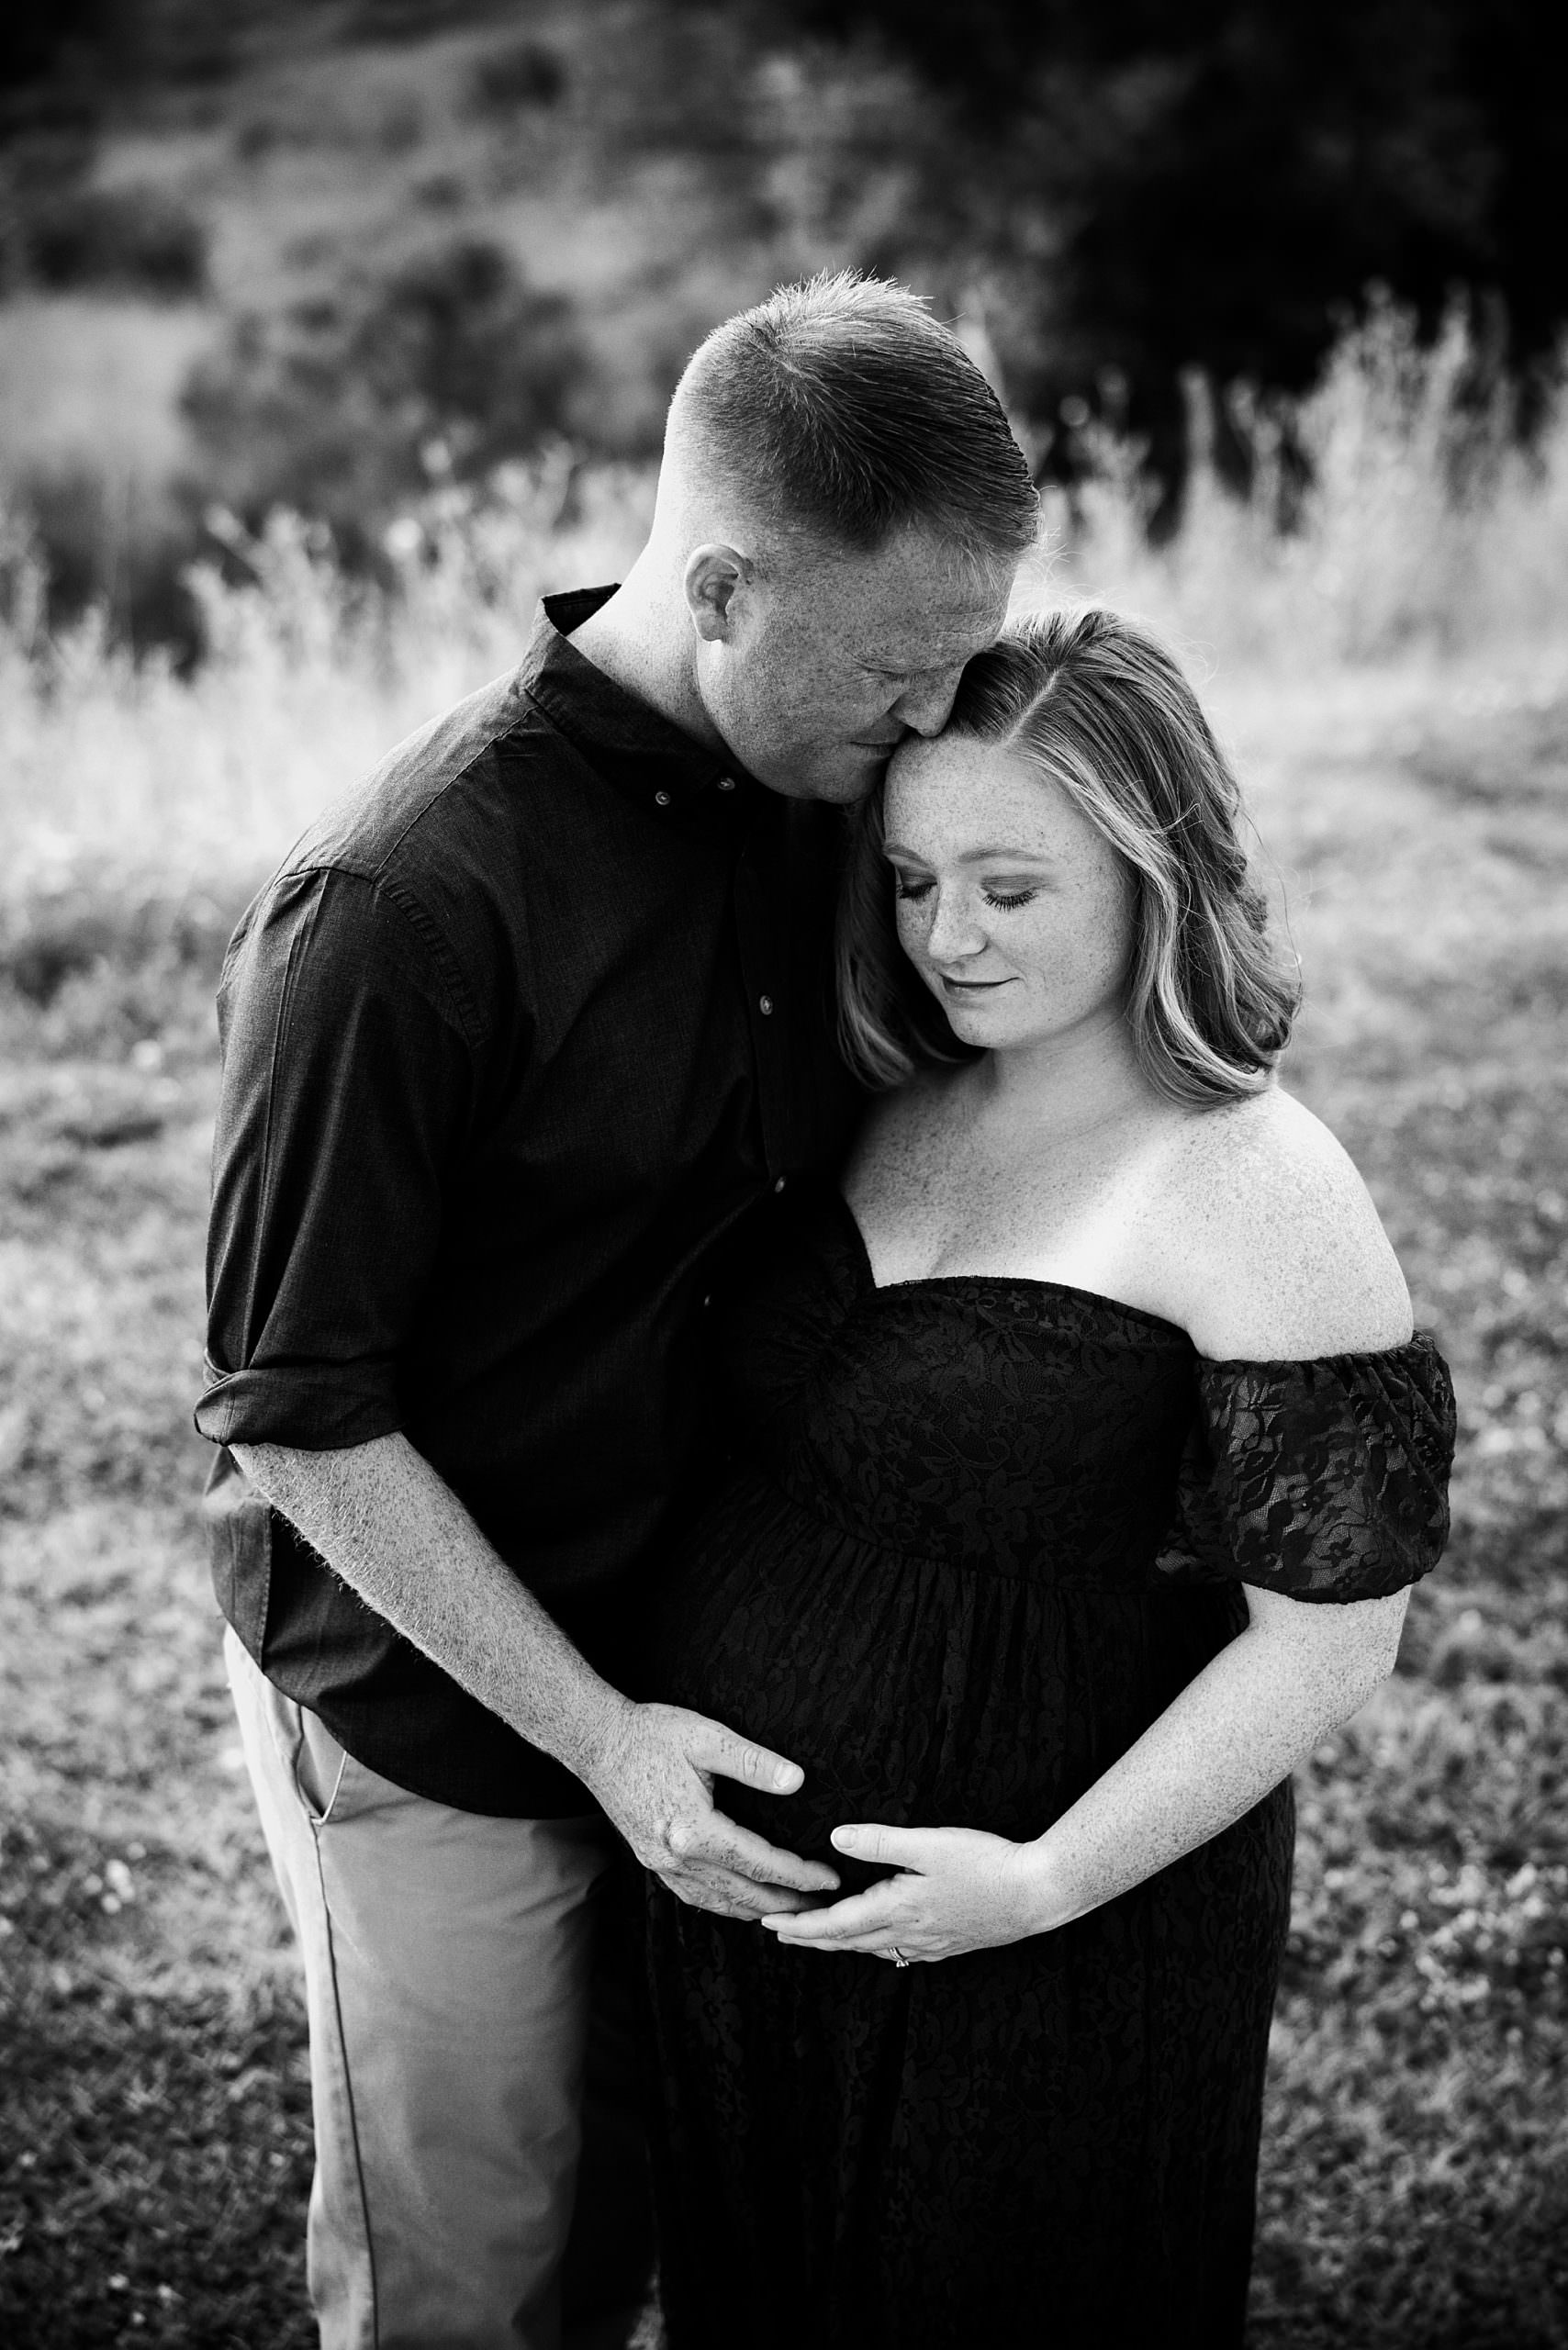 Maternity Photography in Oceanside, Maternity Photography in Carlsbad, Carlsbad Photographer, Carlsbad Photography, Oceanside Photographer, Oceanside Photography